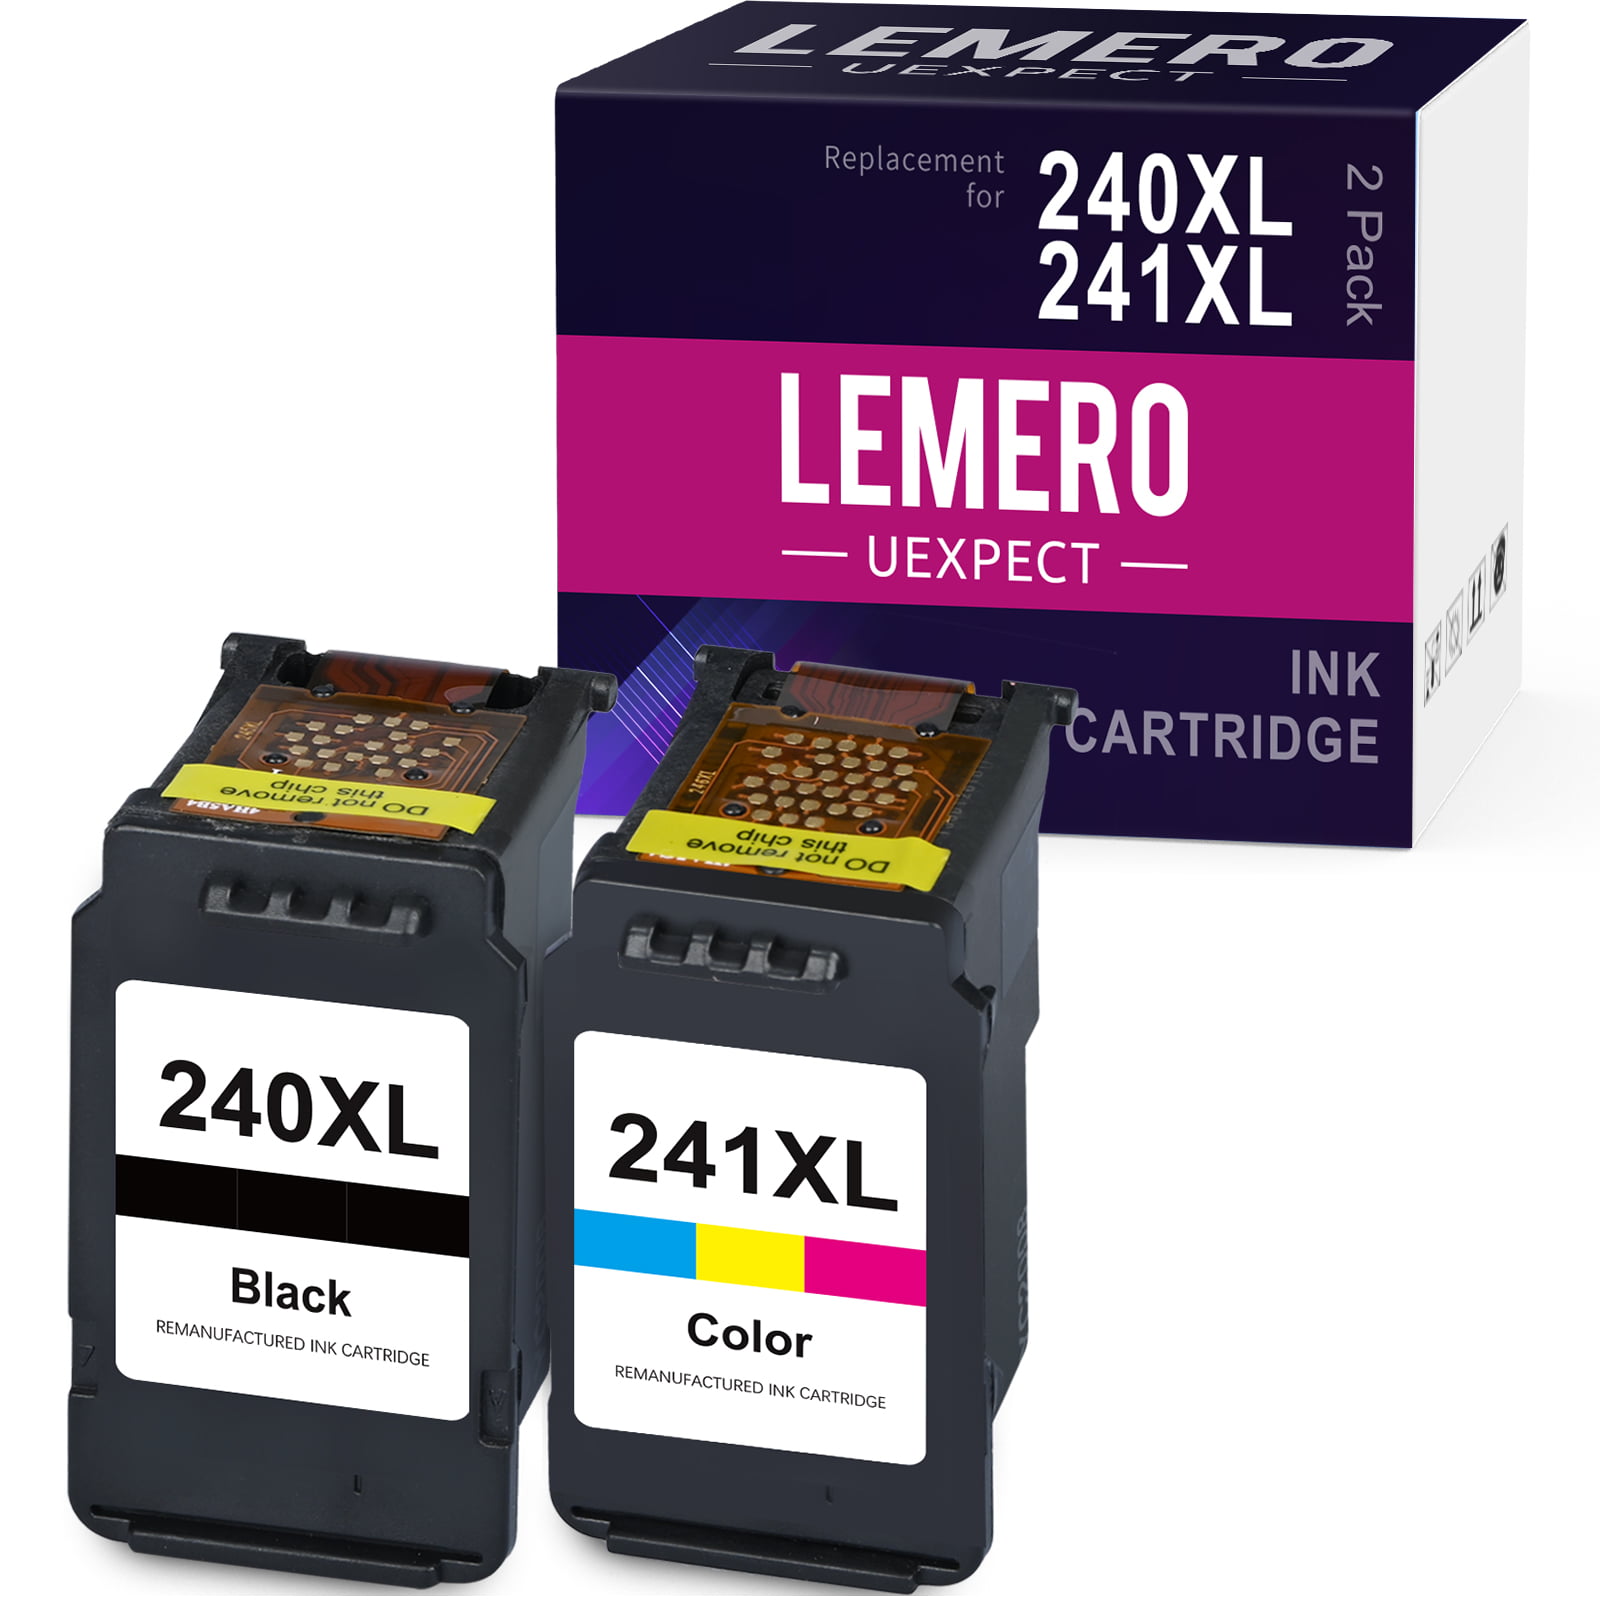 ZIPRINT Remanufactured Ink Cartridge Replacement for Canon 240XL 240 PG-240XL Black use with Pixma MG3620 TS5120 MG2120 MG3520 MX452 MX512 MX532 MX472 MG3120 MG3122 MG4120 High Yield 2 Black 